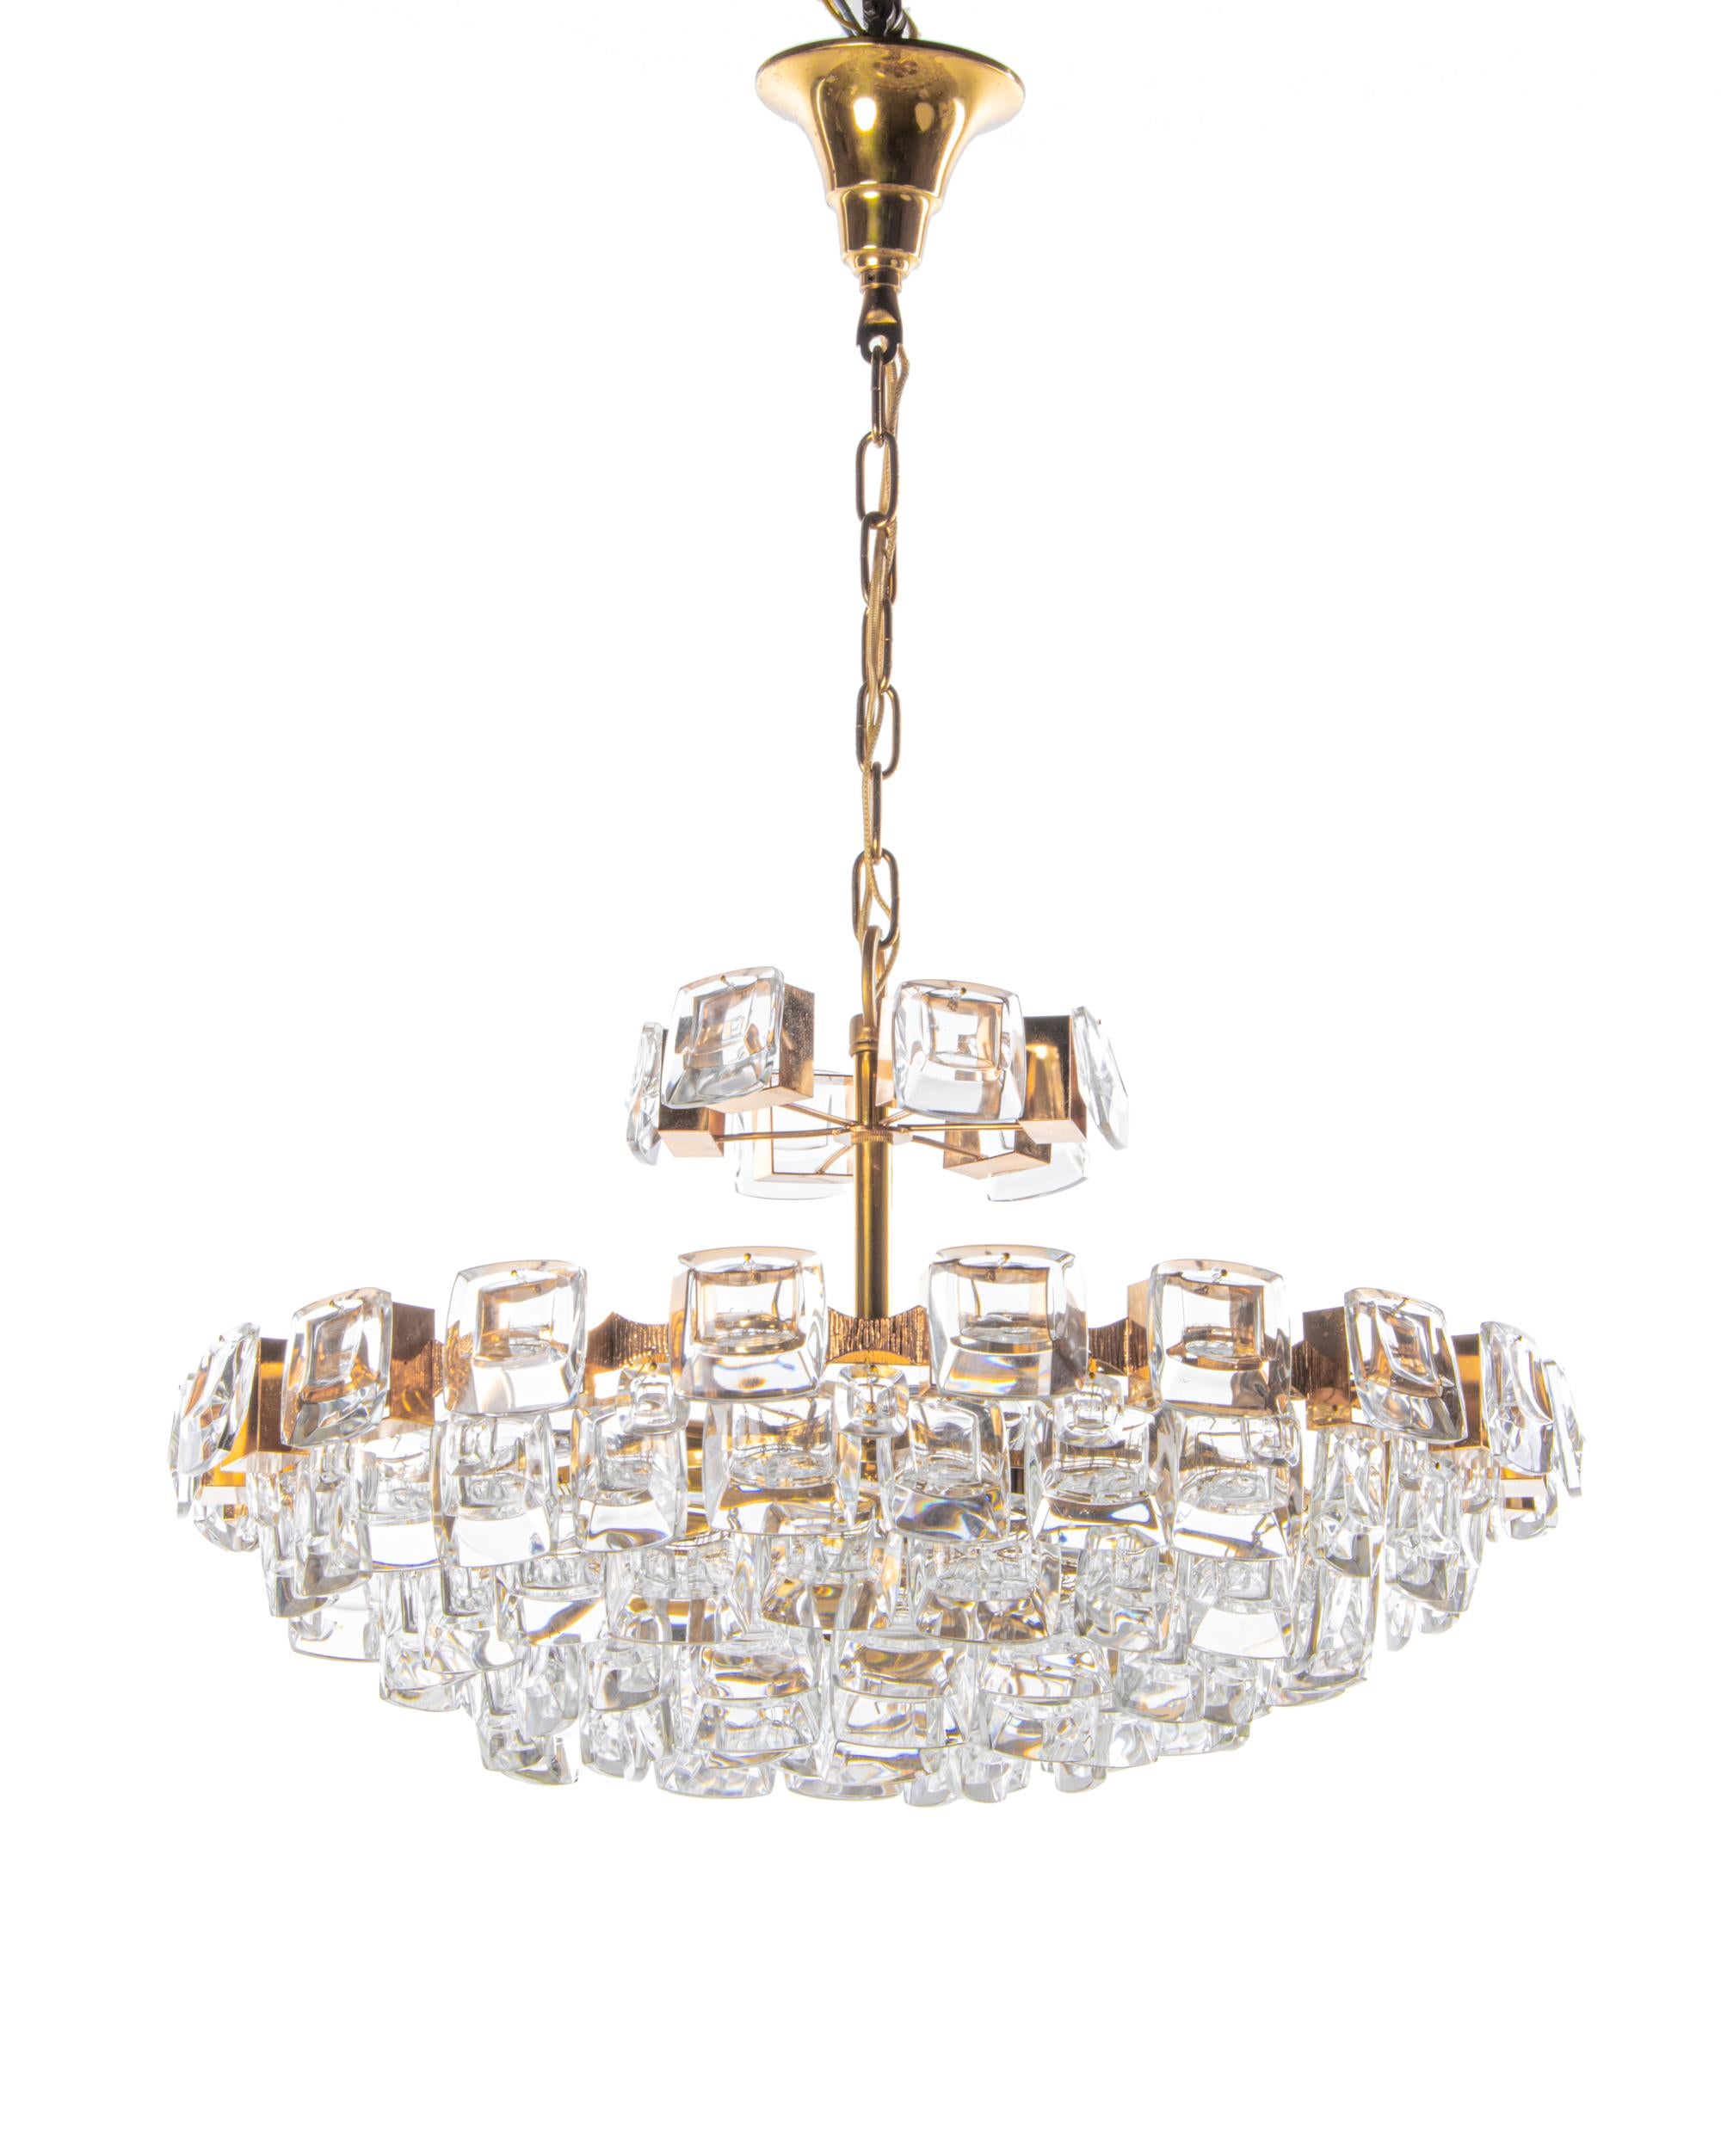 Elegant large chandelier with jewel crystals on a gilt-brass frame. 

The sparkling and glittering Palwa chandeliers are hanging in the Residence of the Empress Marie-Therese of Austria, in the Sultan of Brunei’s palaces, in the palaces of the Kings